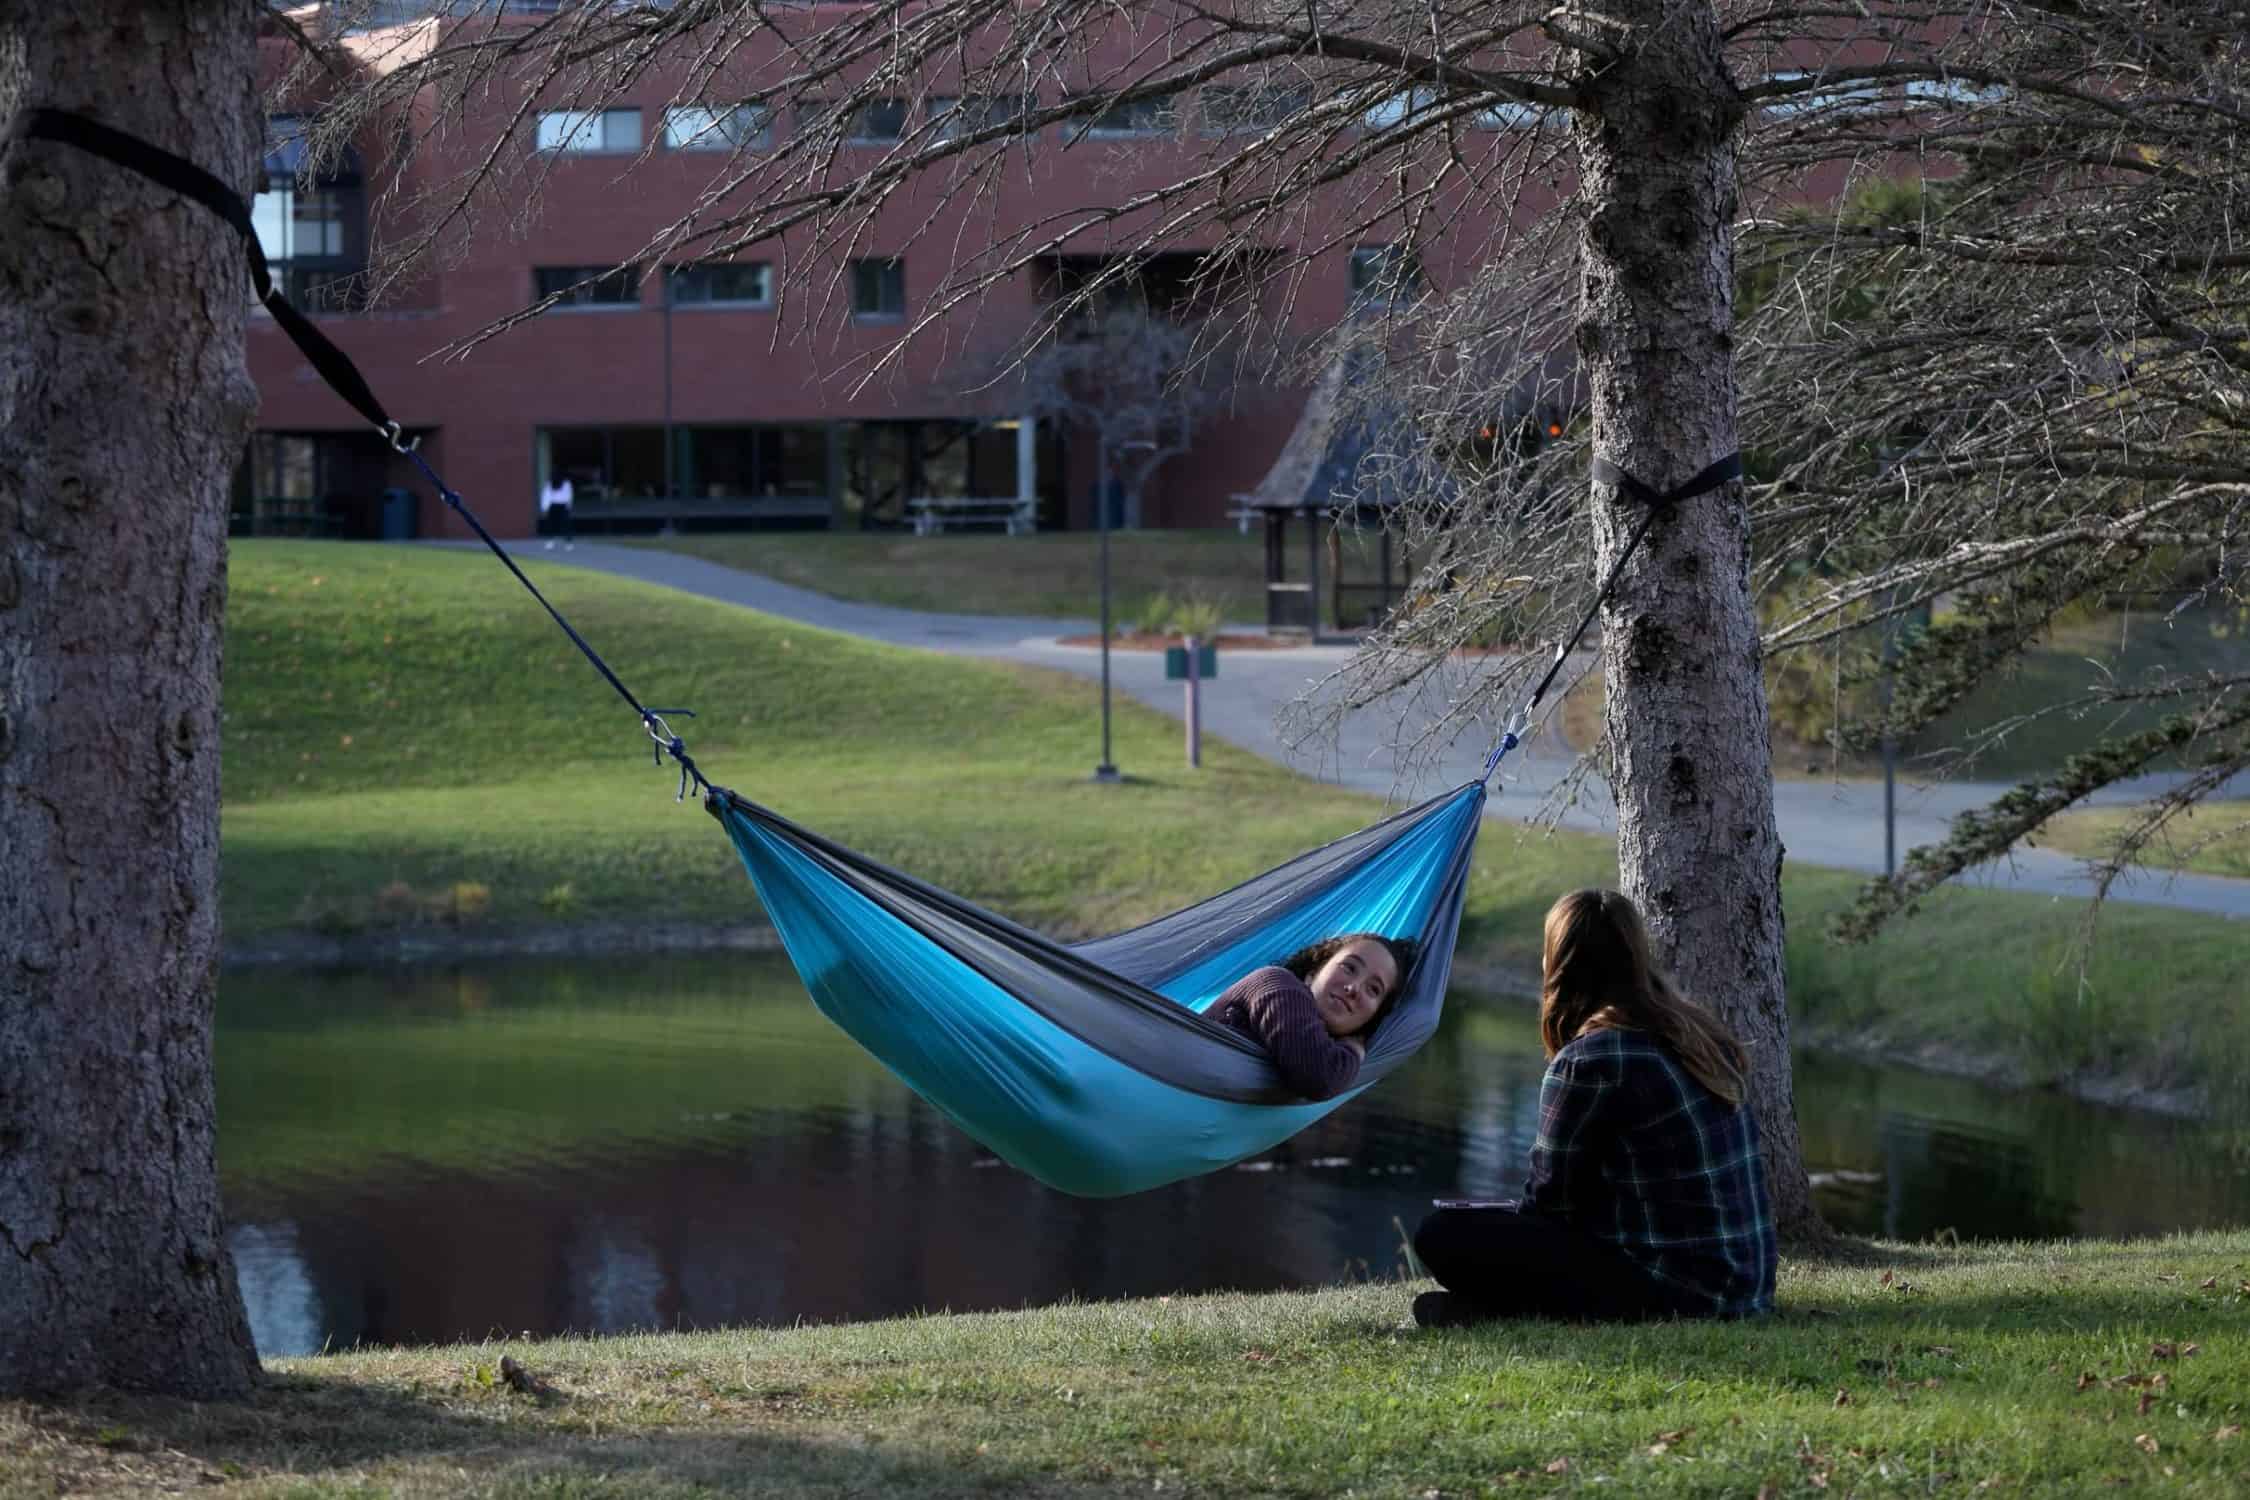 Student relaxes in her hammock on campus while talking to a friend